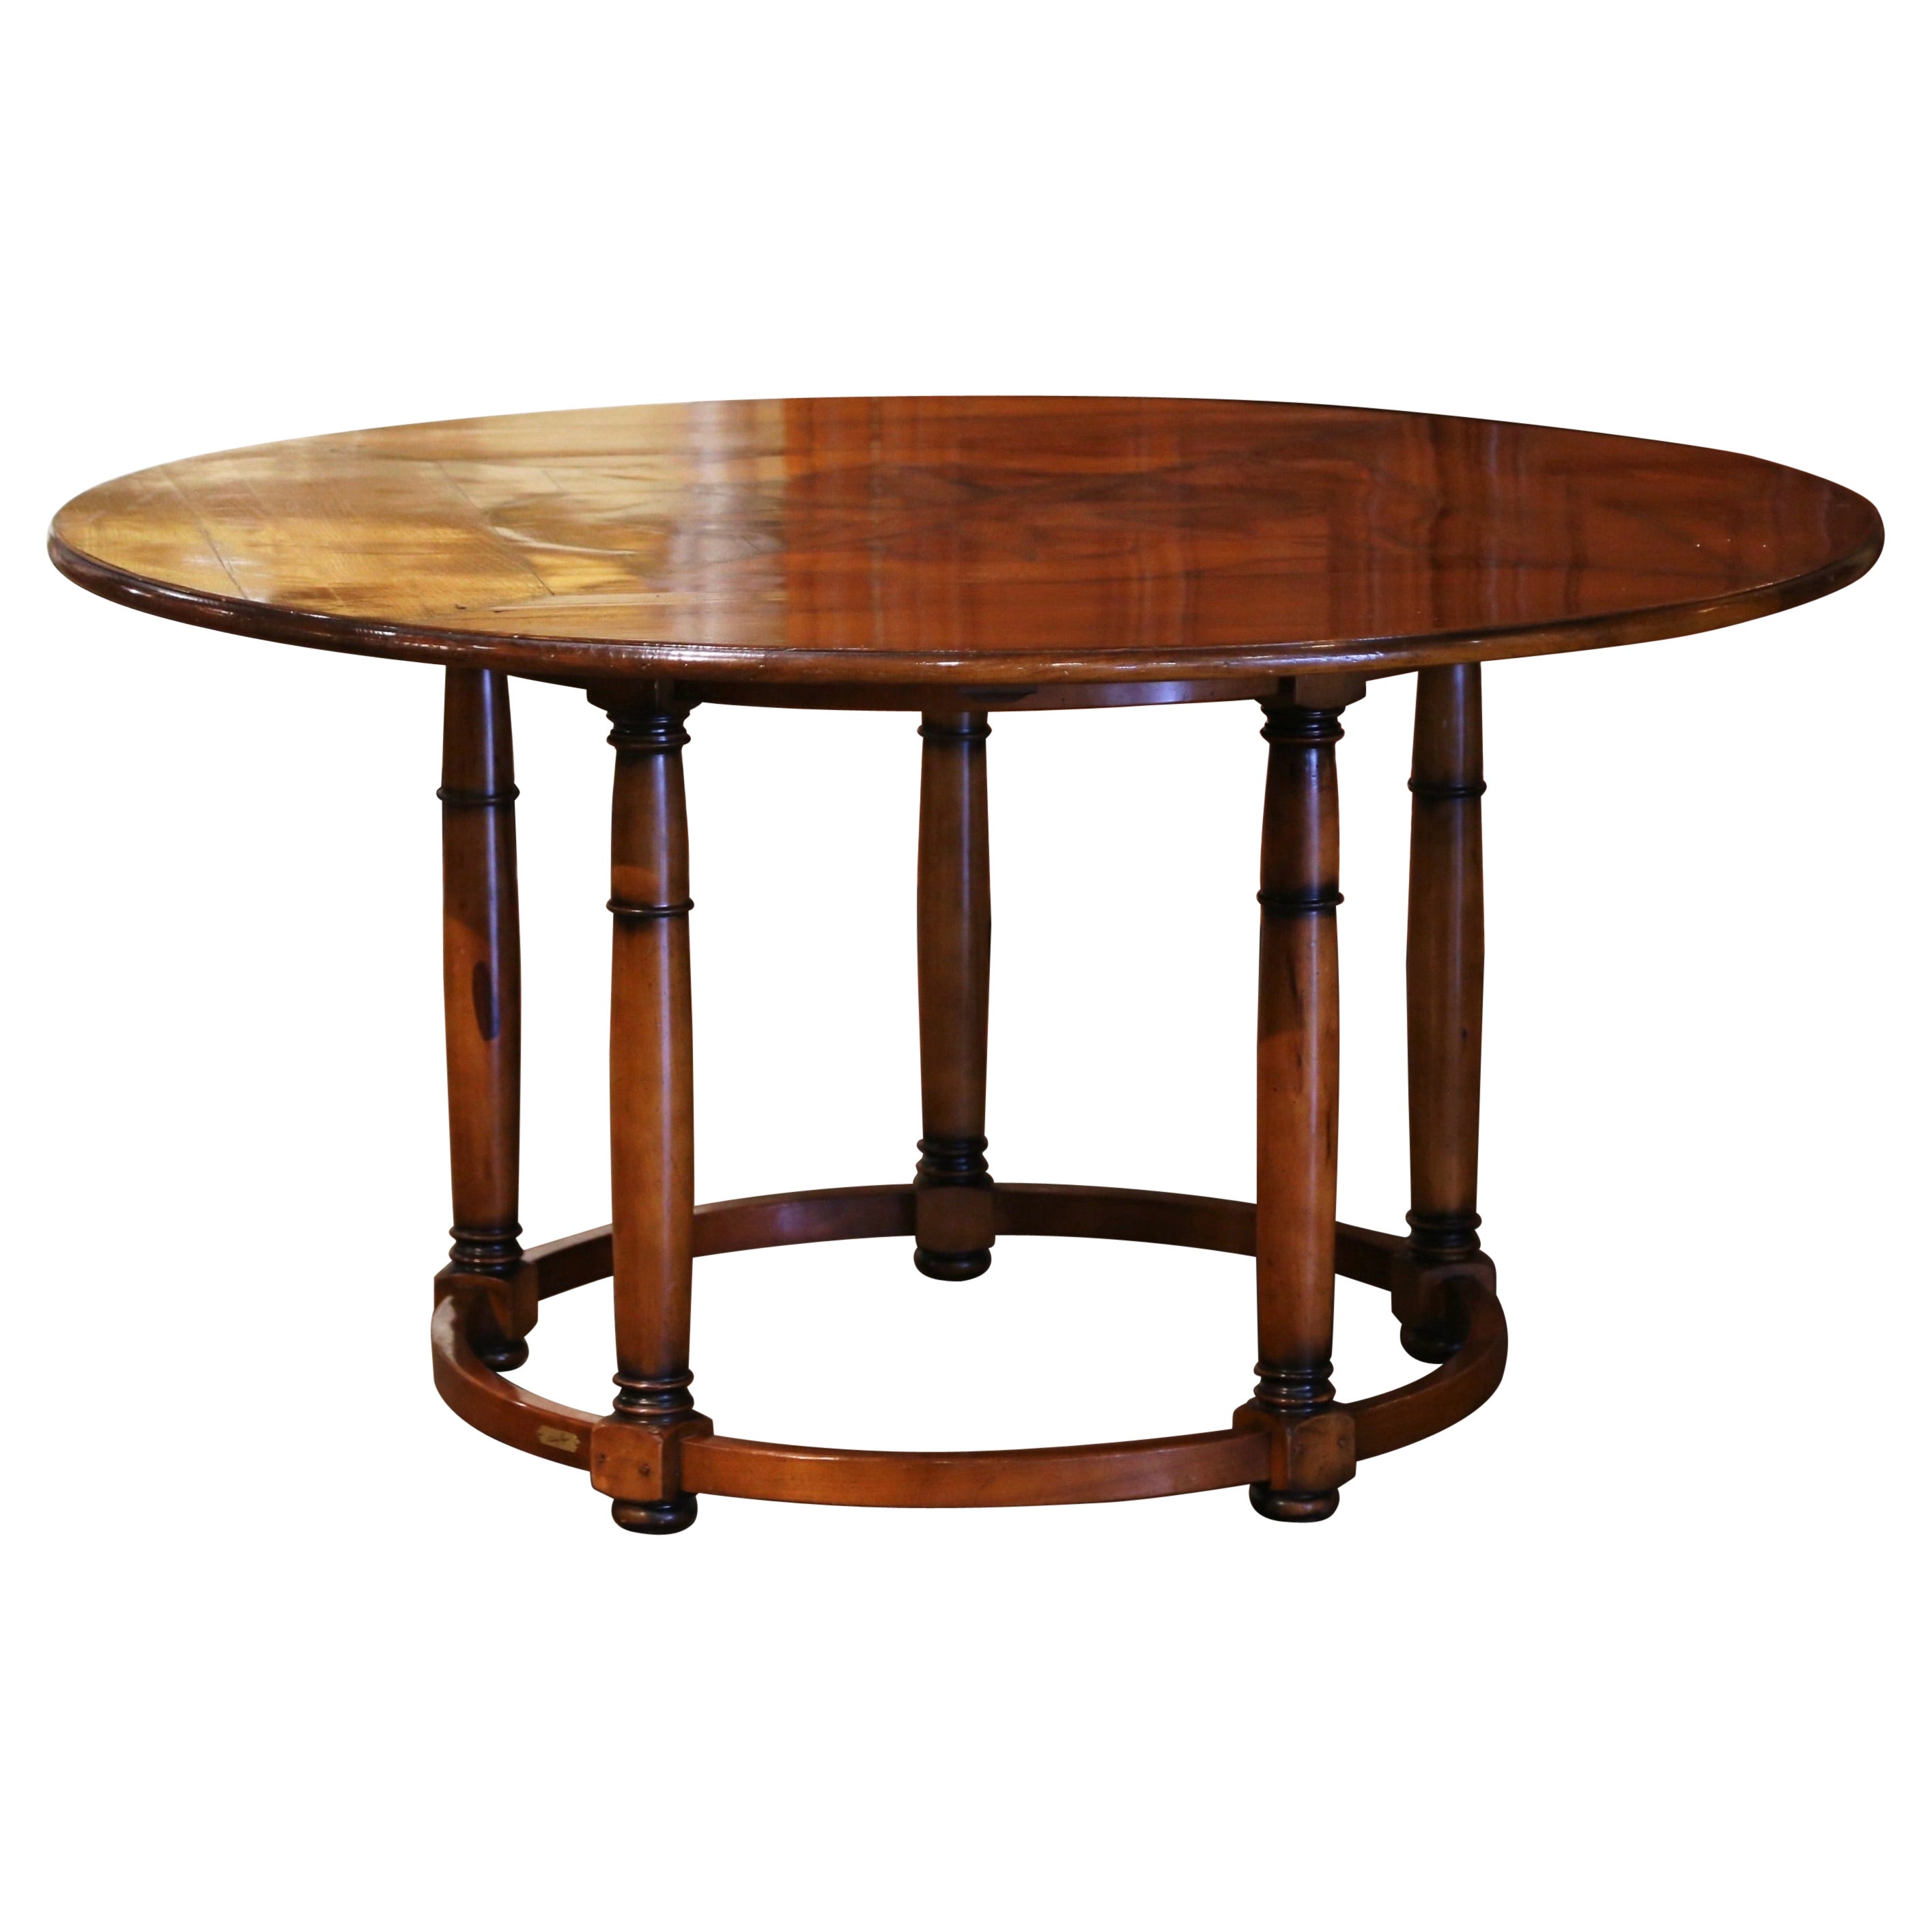 French Fruitwood Marquetry Five-Leg Round Table Signed Christian Noyrand